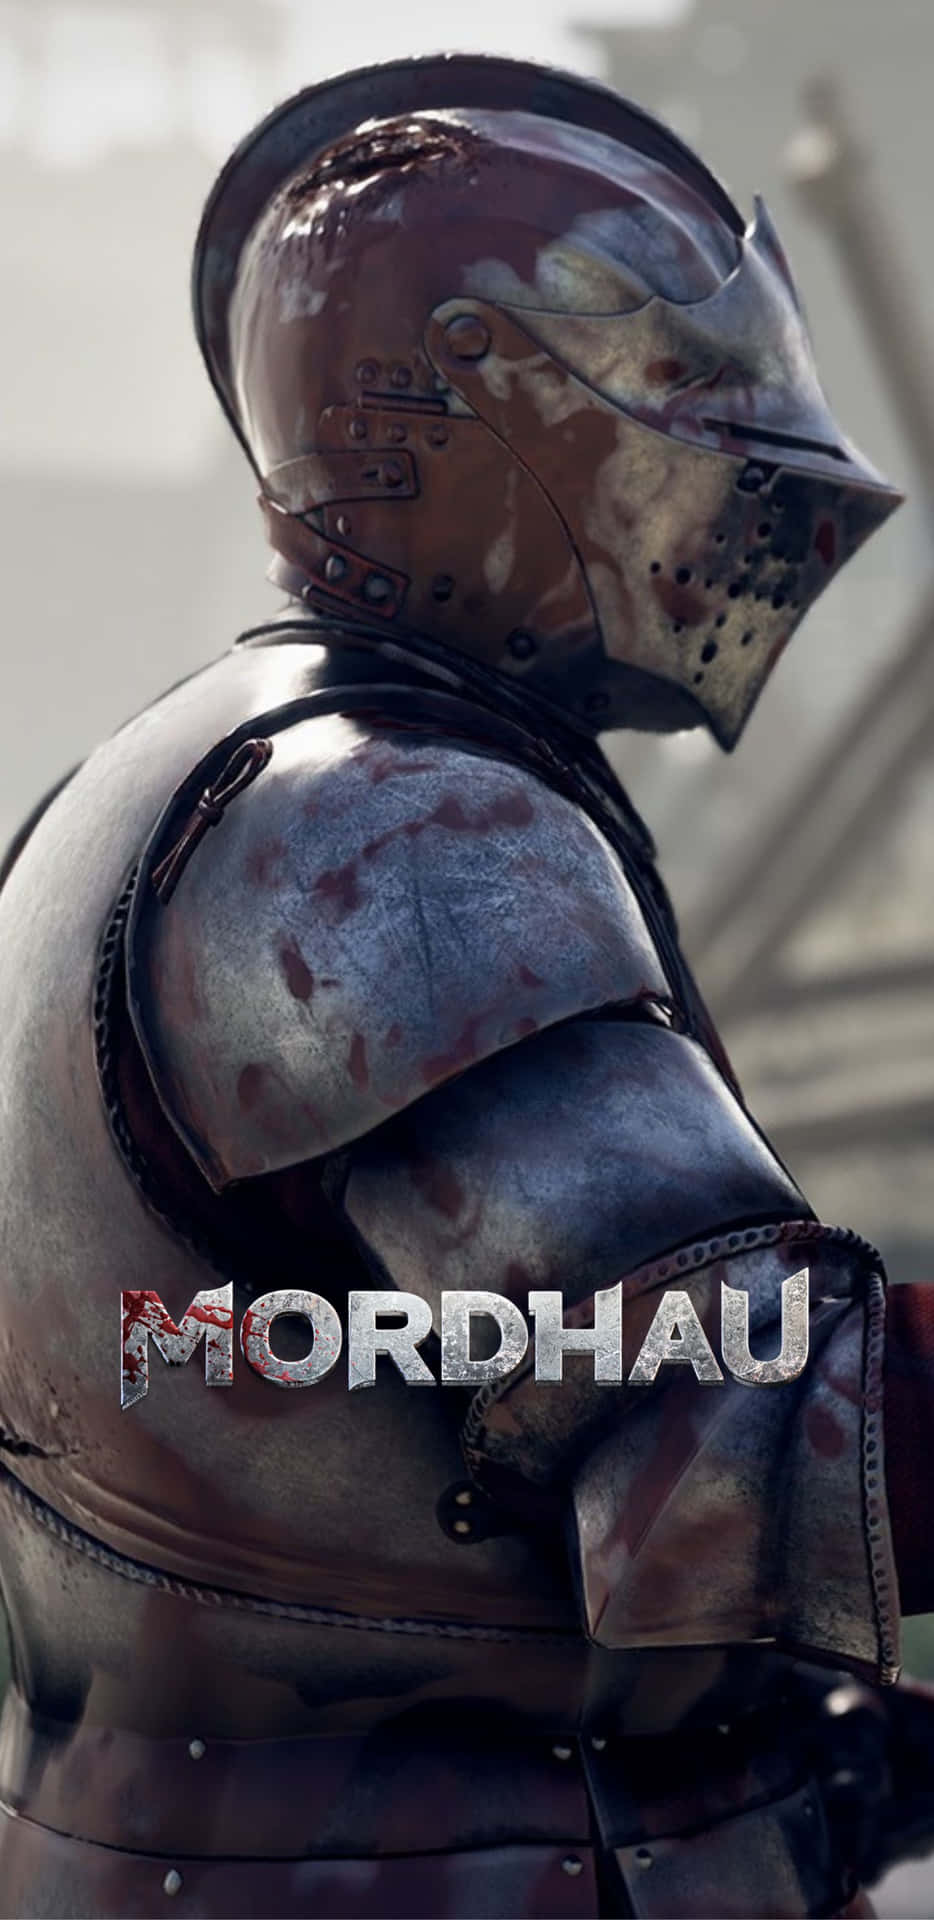 Mordhaul - A Medieval Knight In Armor